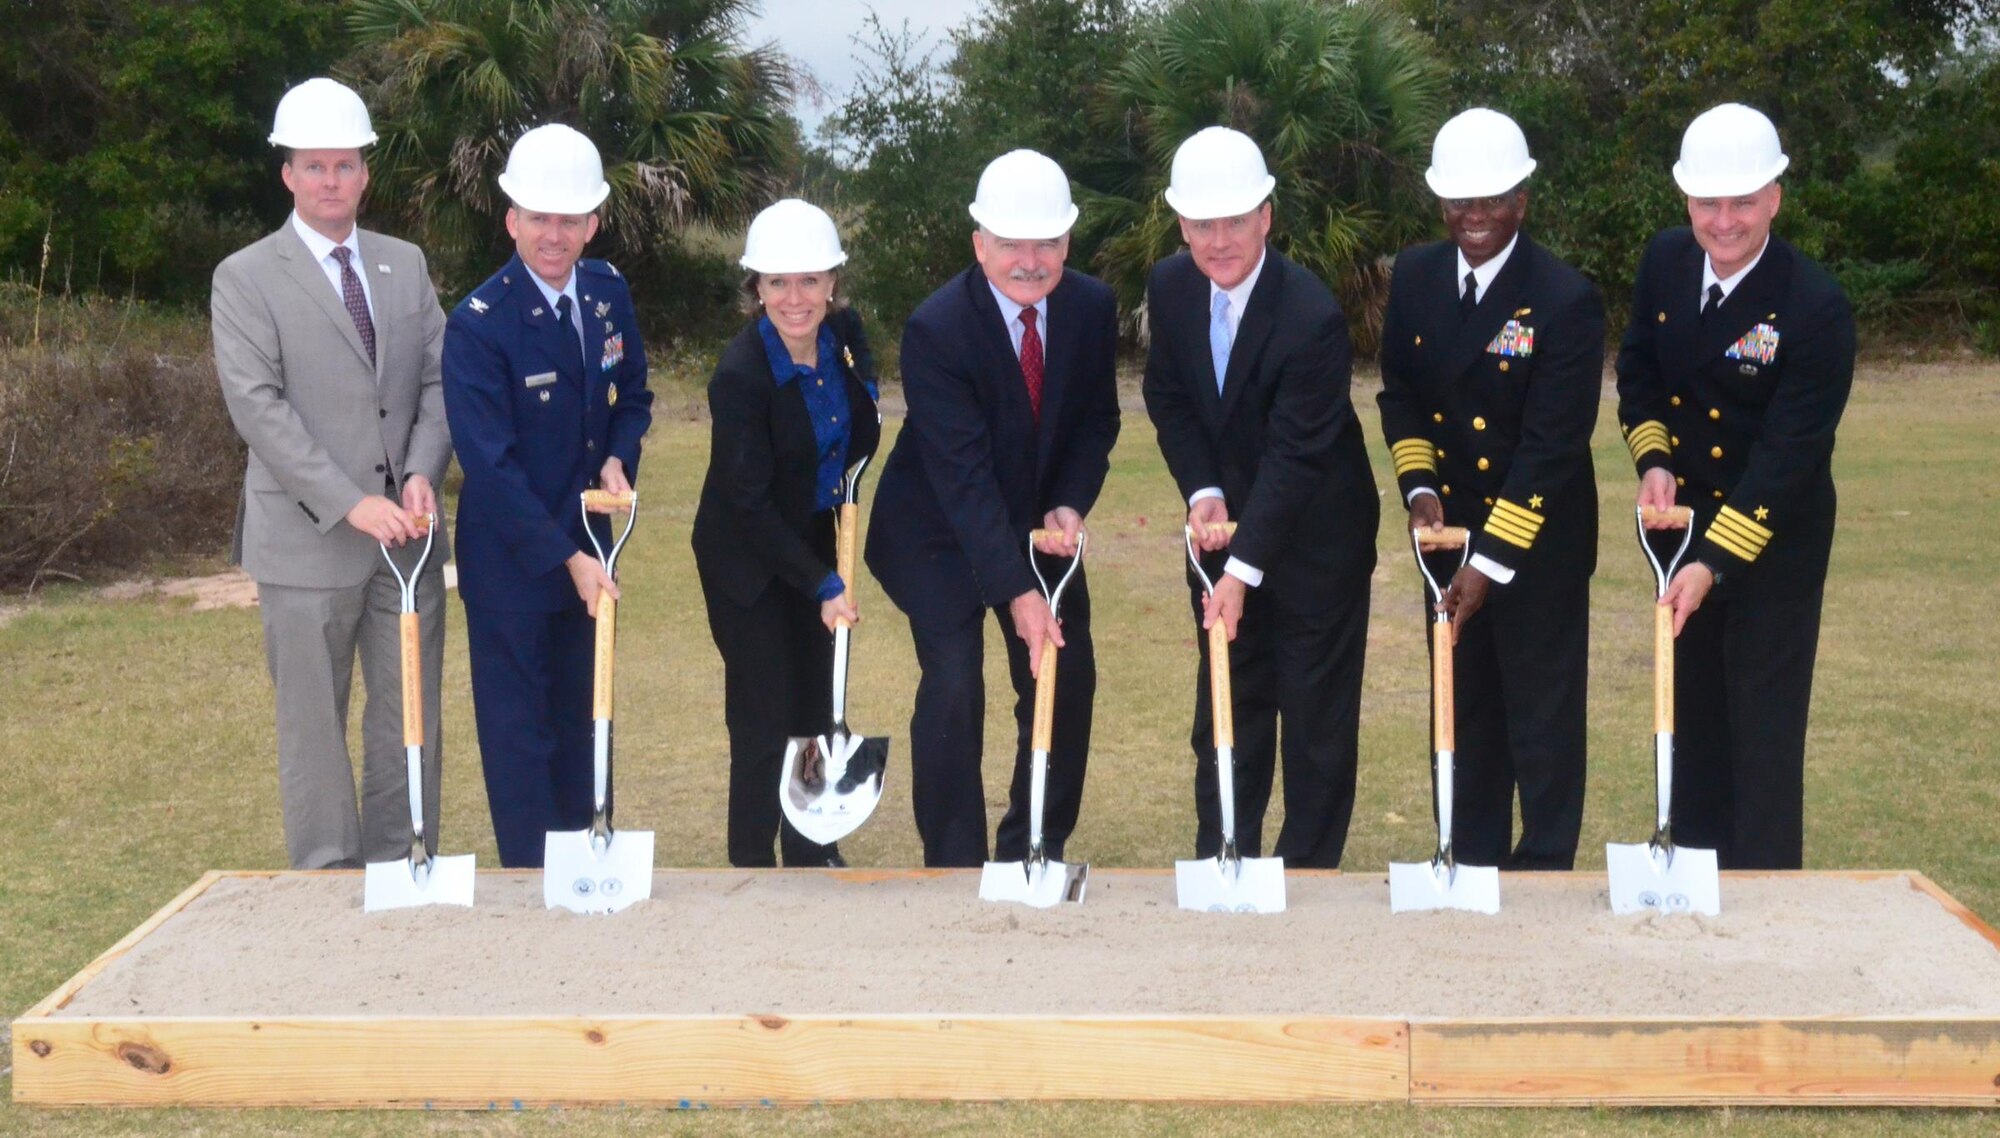 Matthew Hantzmon (left), the chief operating officer of Coronal Development; Col. Matthew W. Higer, the vice commander of the 96th Test Wing, Eglin Air Force Base, Fla.; Miranda A.A. Ballentine, the assistant secretary of the Air Force for installations, environment and energy; Dennis V. McGinn, the assistant secretary of the Navy for energy, installations and environment; Stan Connally, the president and CEO of Gulf Power; Capt. Keith W. Hoskins, the commanding officer, Naval Air Station Pensacola, Fla.; and Capt. Todd A. Bahlau, the commanding officer, NAS Whiting Field, Fla., broke ground Dec. 16, 2015, at a ceremony at NAS Pensacola, marking the start of construction for three large-scale solar electric generating facilities.  (U.S. Navy photo/Mike O'Connor)